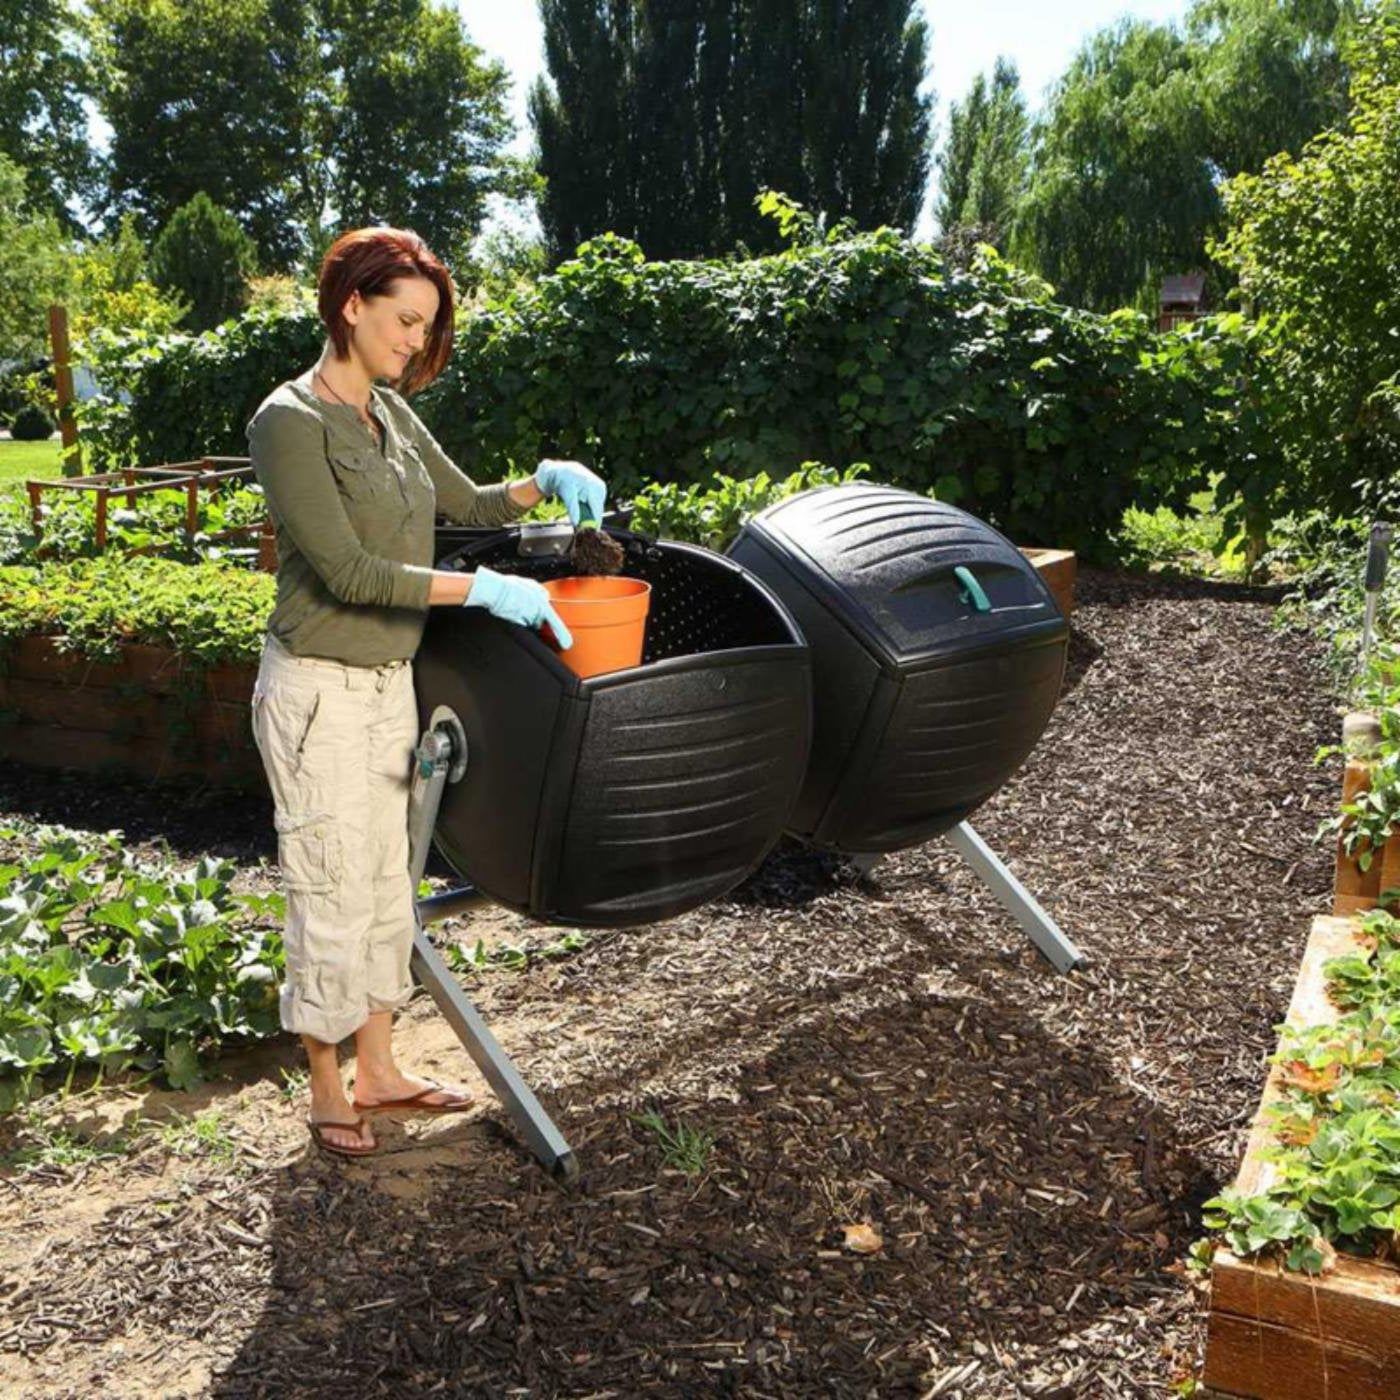 Outdoor > Gardening > Compost Bins - Set Of Two 50-Gallon Compost Bin Tumbler Double Rotating Composter